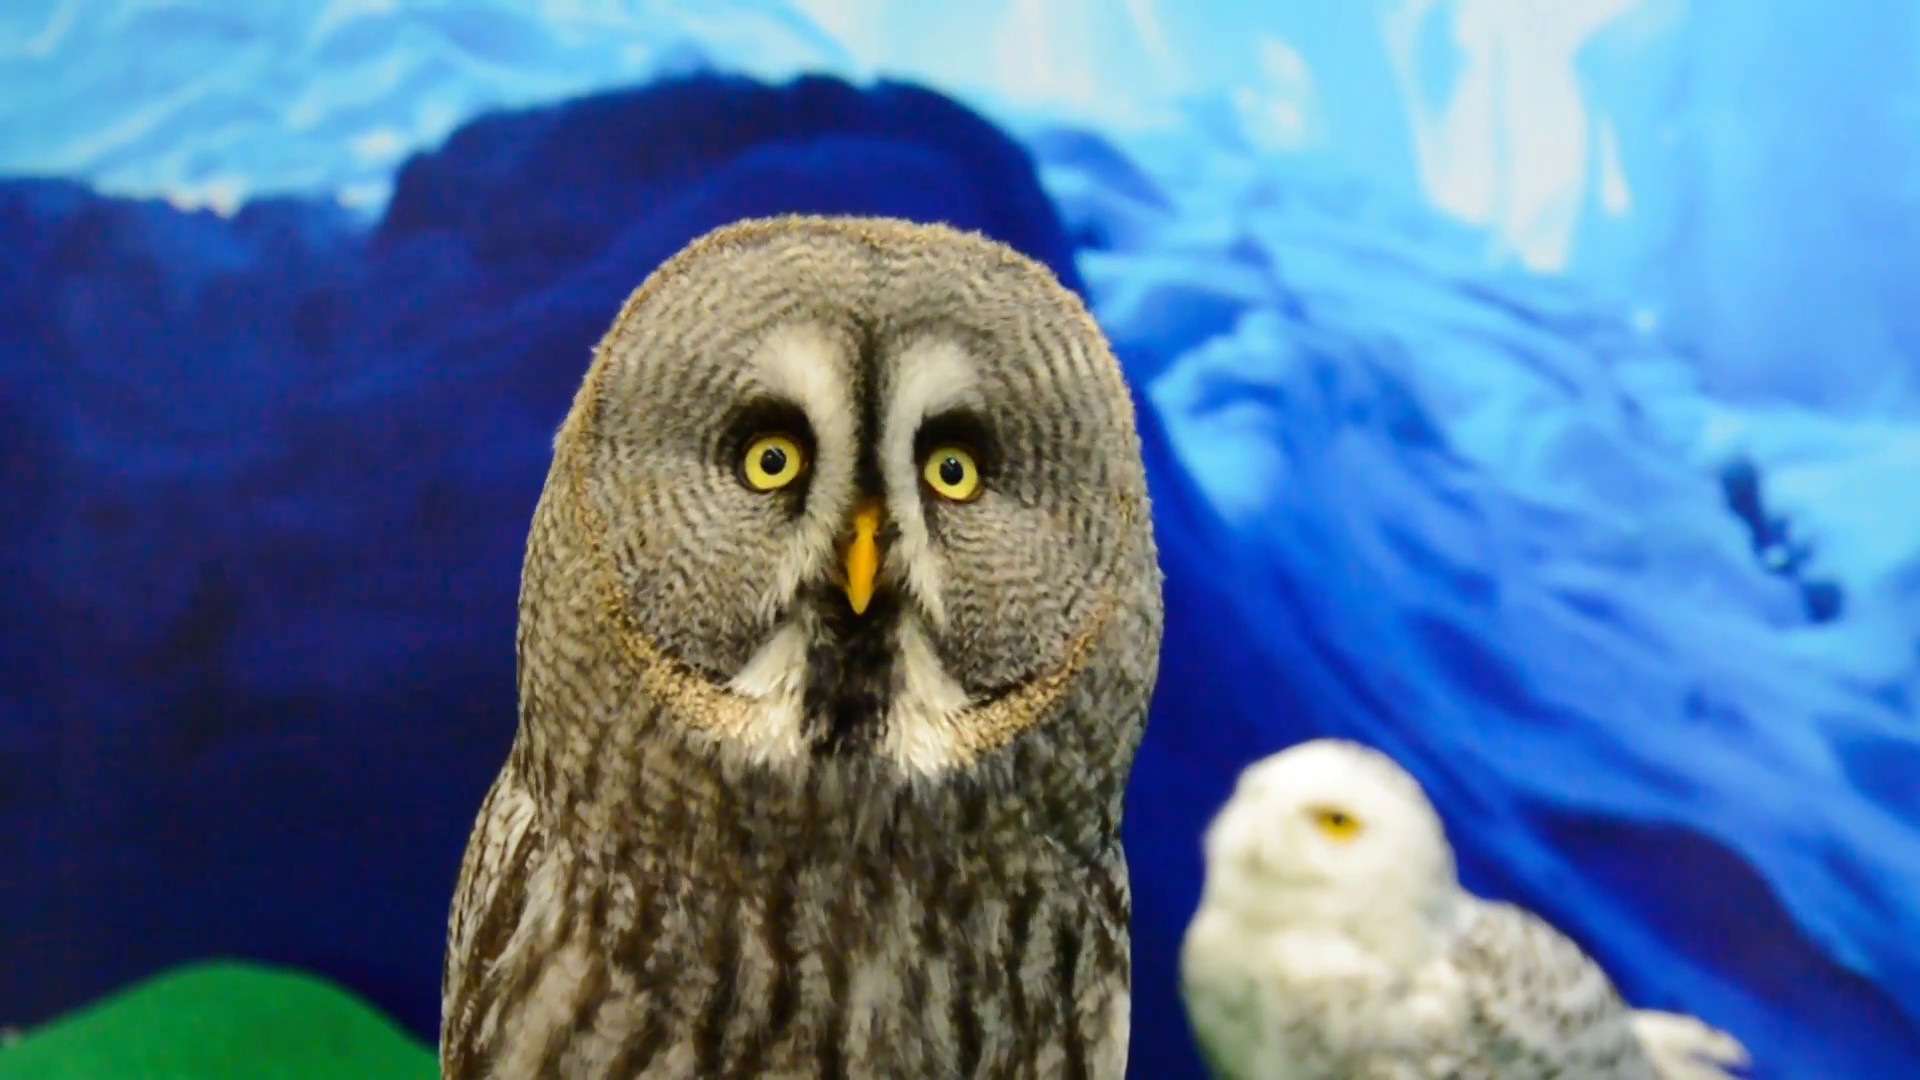 1920x1080 Pet Great grey owl bird of prey head is turning around like a robot showing  calm facial expression in arctic frozen winter background. It's a weird and  cute ...